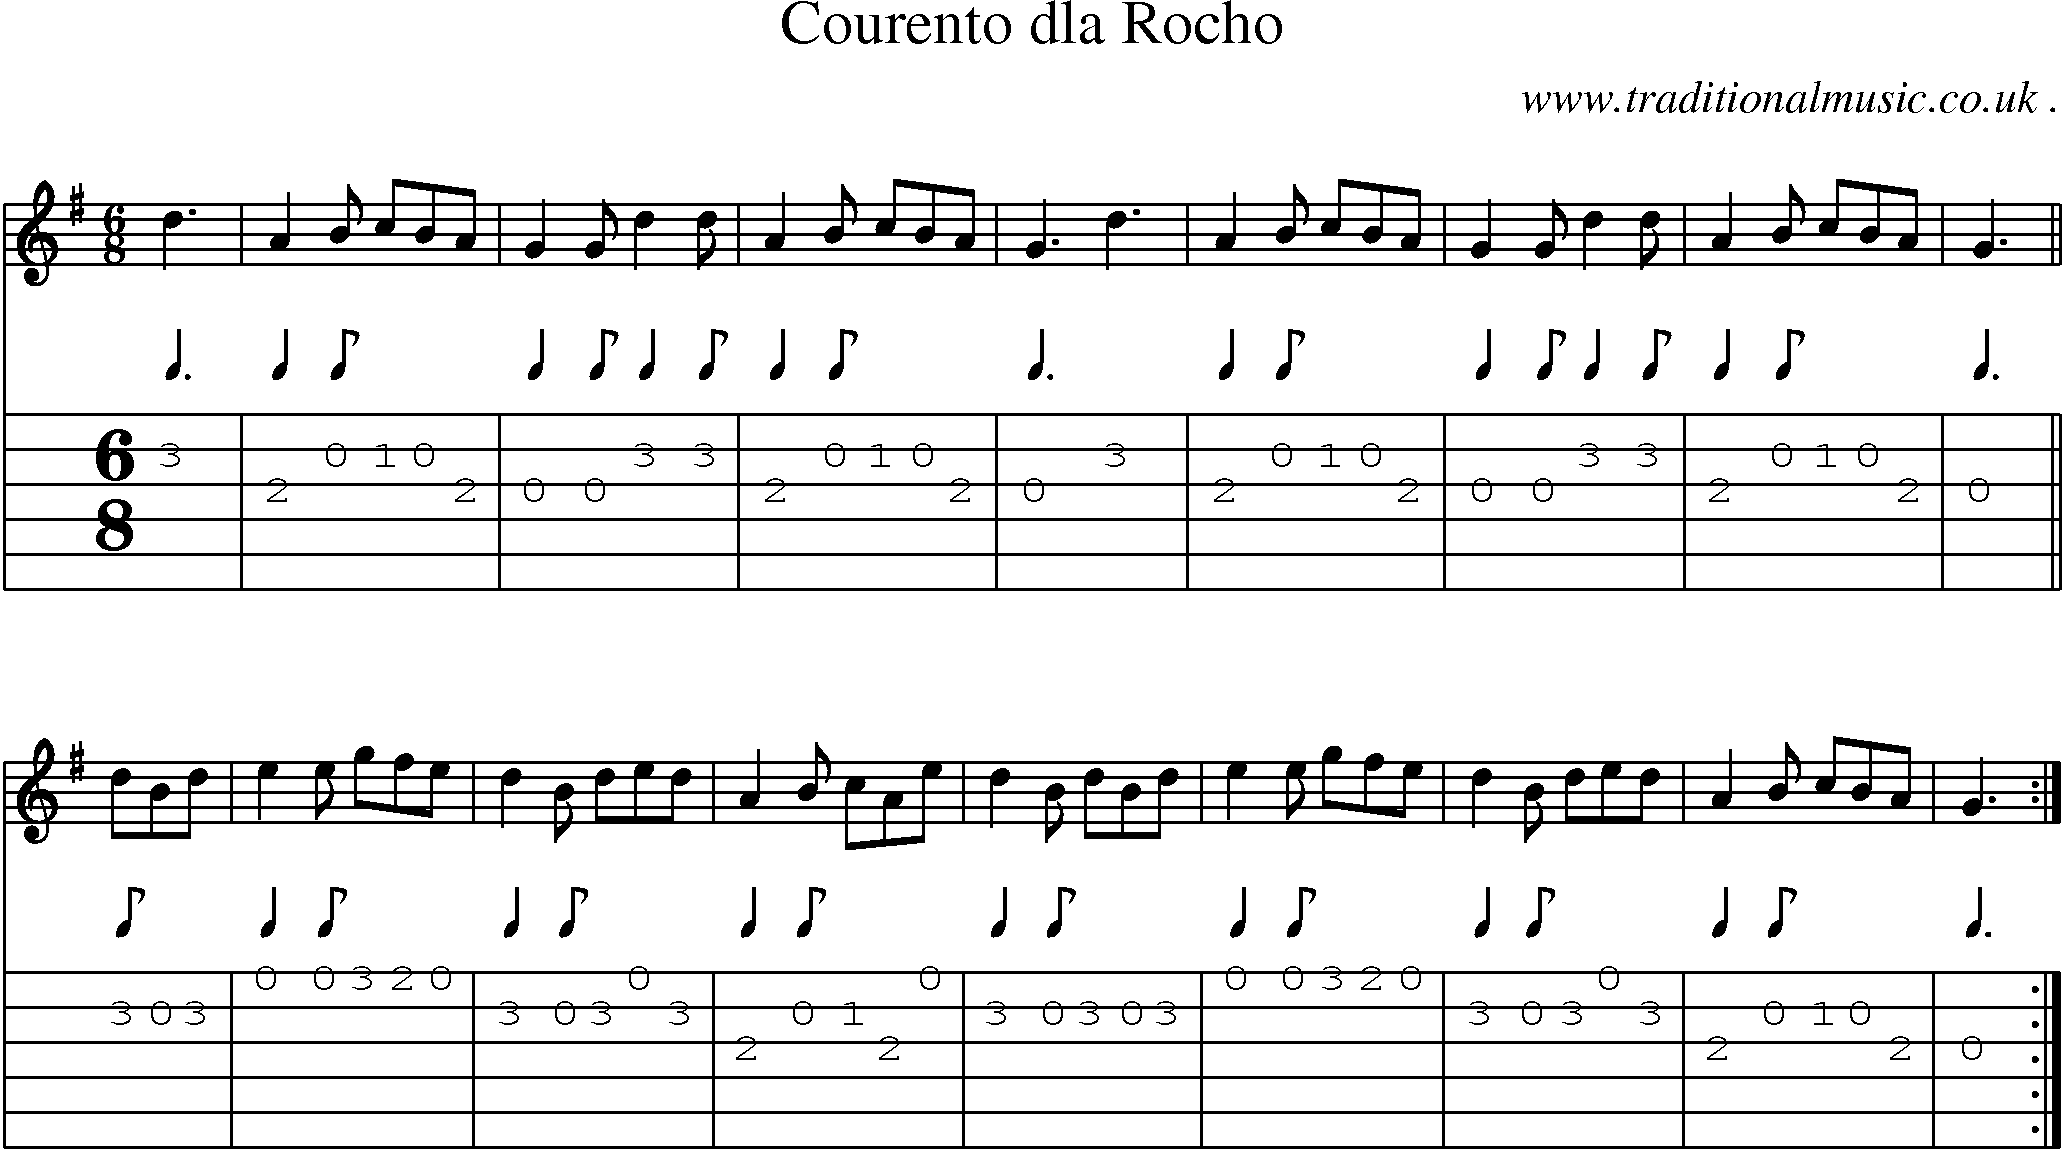 Sheet-Music and Guitar Tabs for Courento Dla Rocho